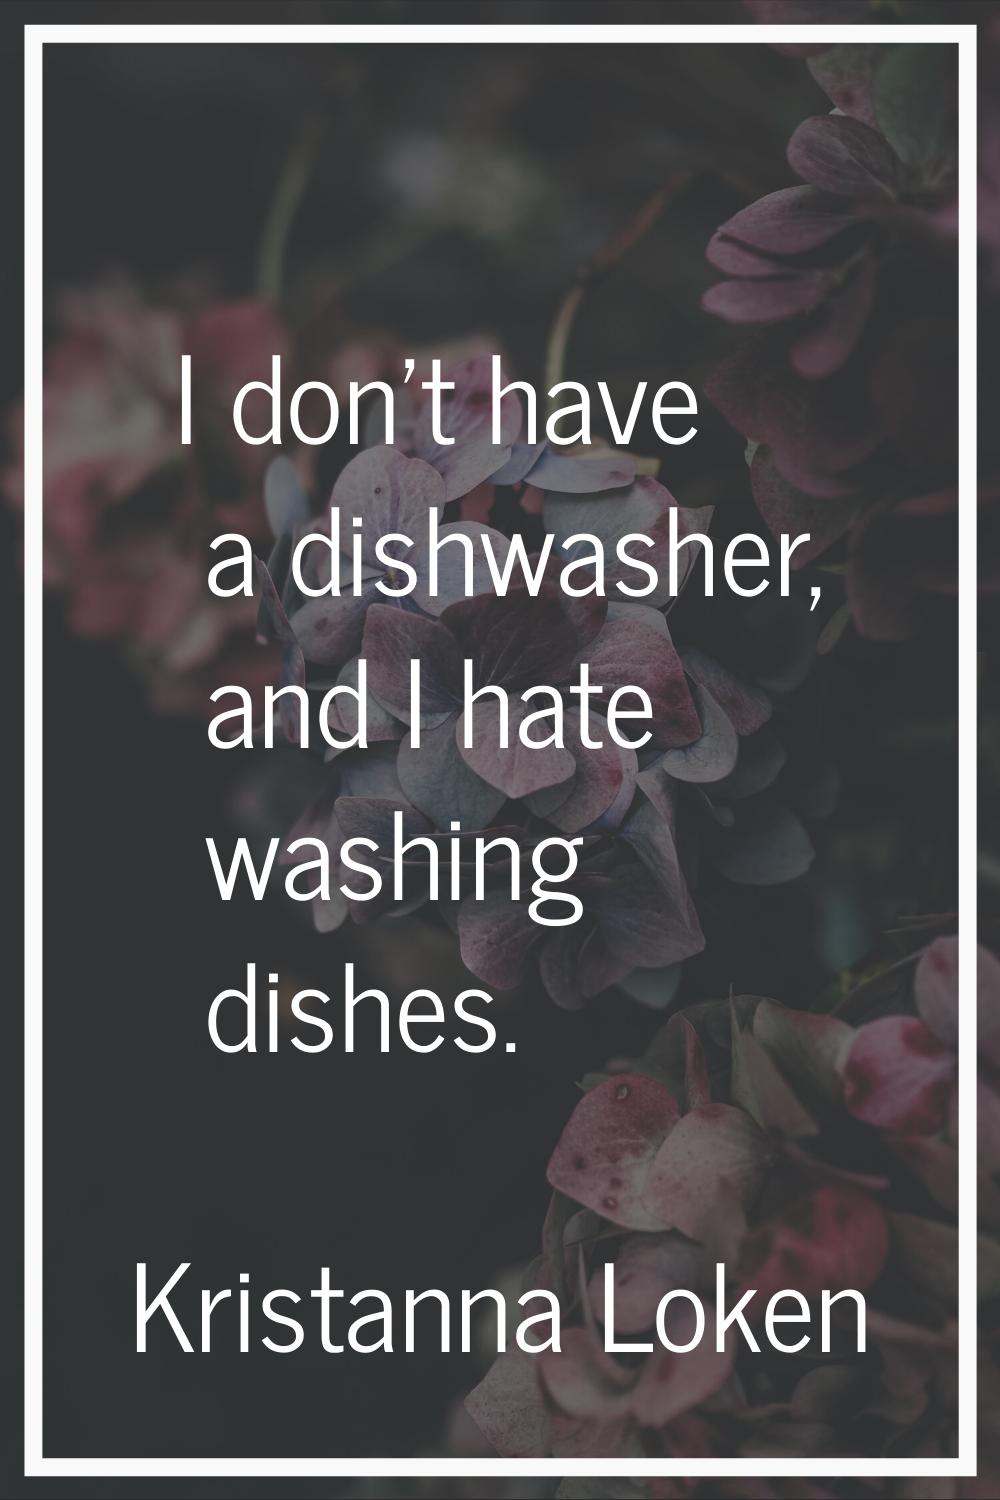 I don't have a dishwasher, and I hate washing dishes.